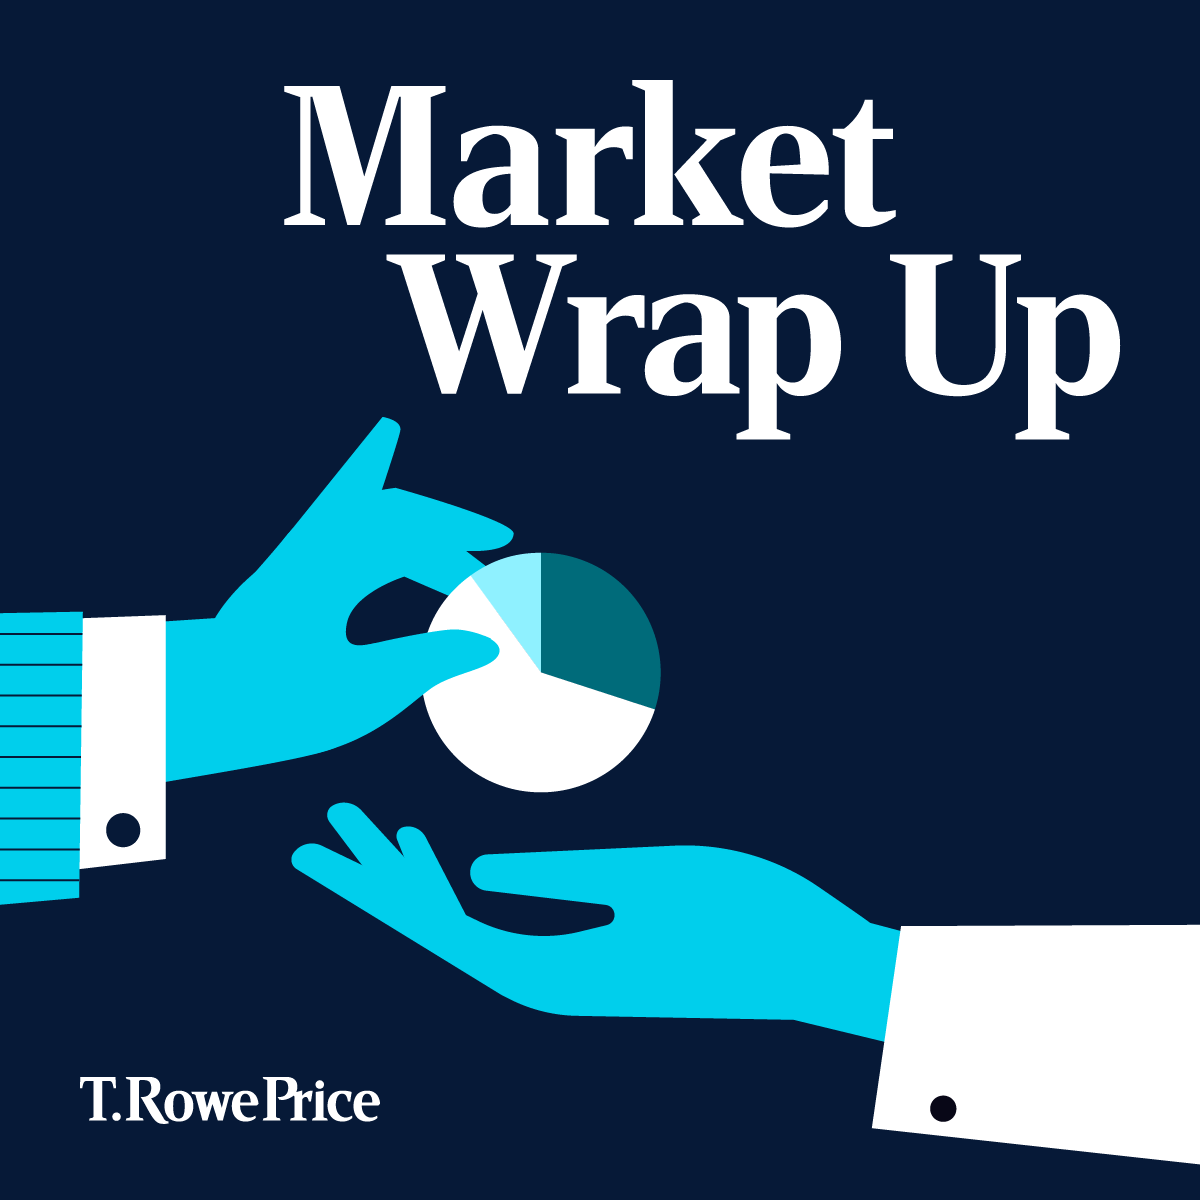 Every week, our analysts offer a recap of global market activity. Here’s the latest. trowe.com/3UprjFo